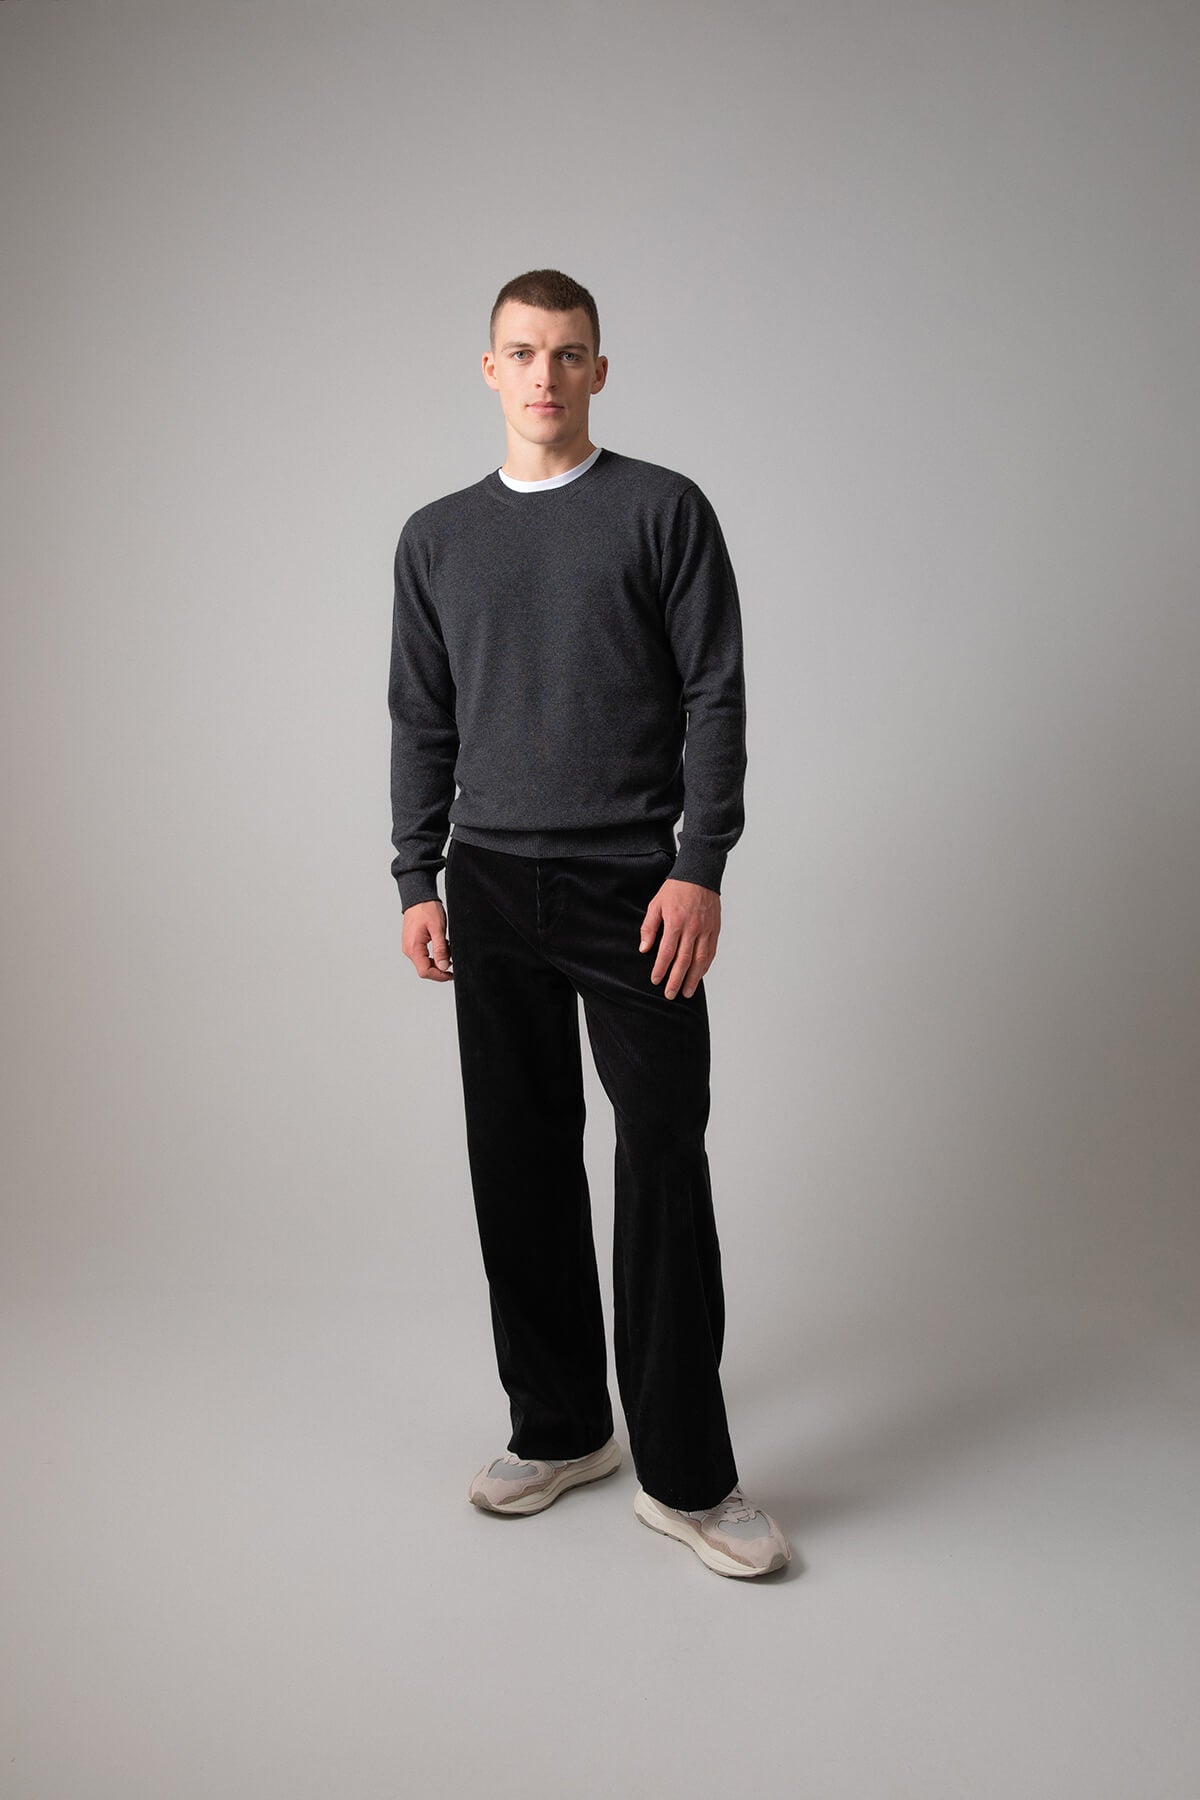 Johnstons of Elgin Men’s Cashmere Round Neck Jumper in Charcoal grey on model wearing black trousers on grey background KAI05117HA7165